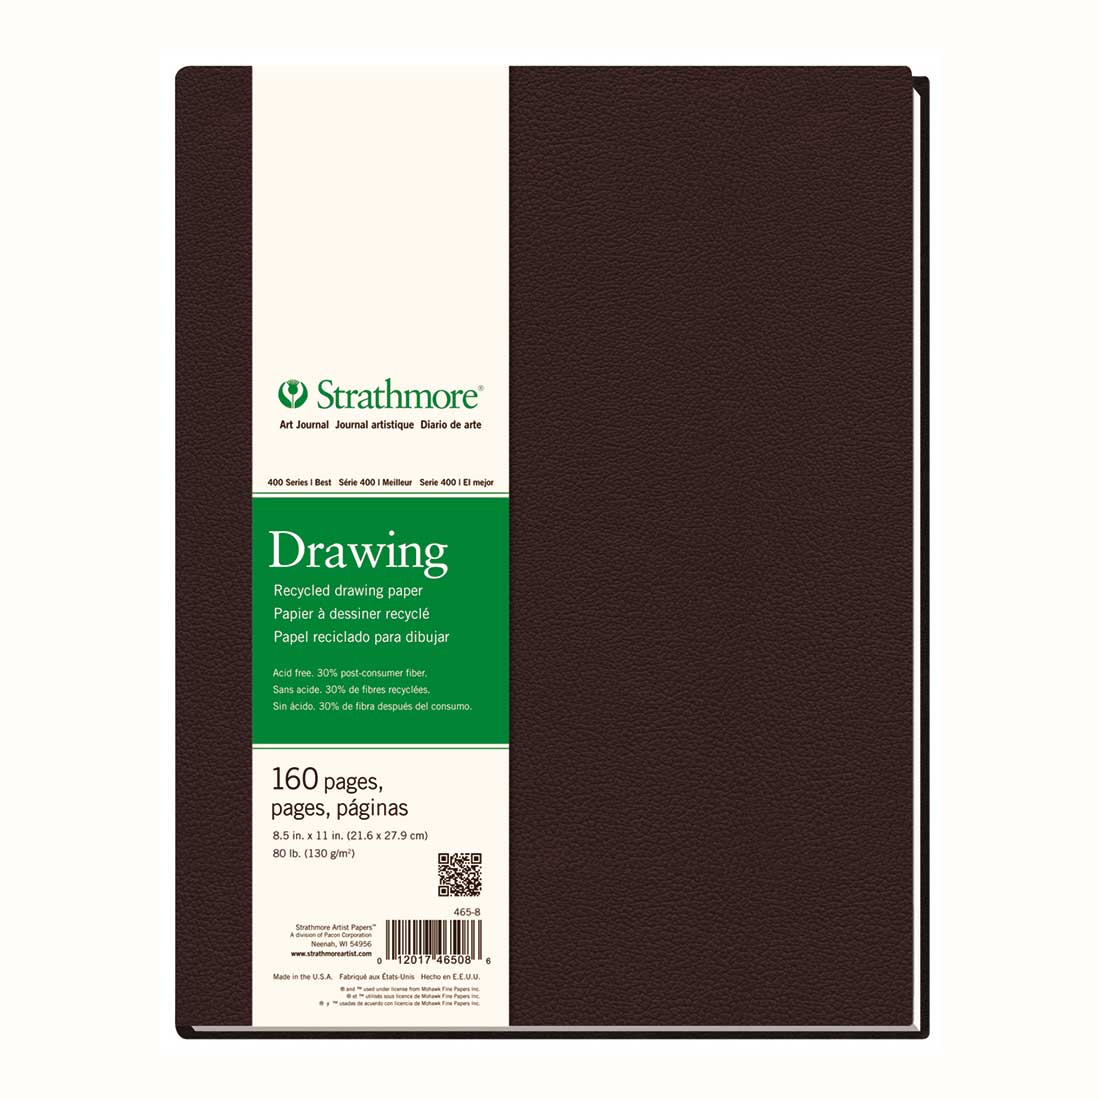 Hahnemuhle Landscape Stitched D&S Sketch Book (Black Cover, A6, 62 Sheets)